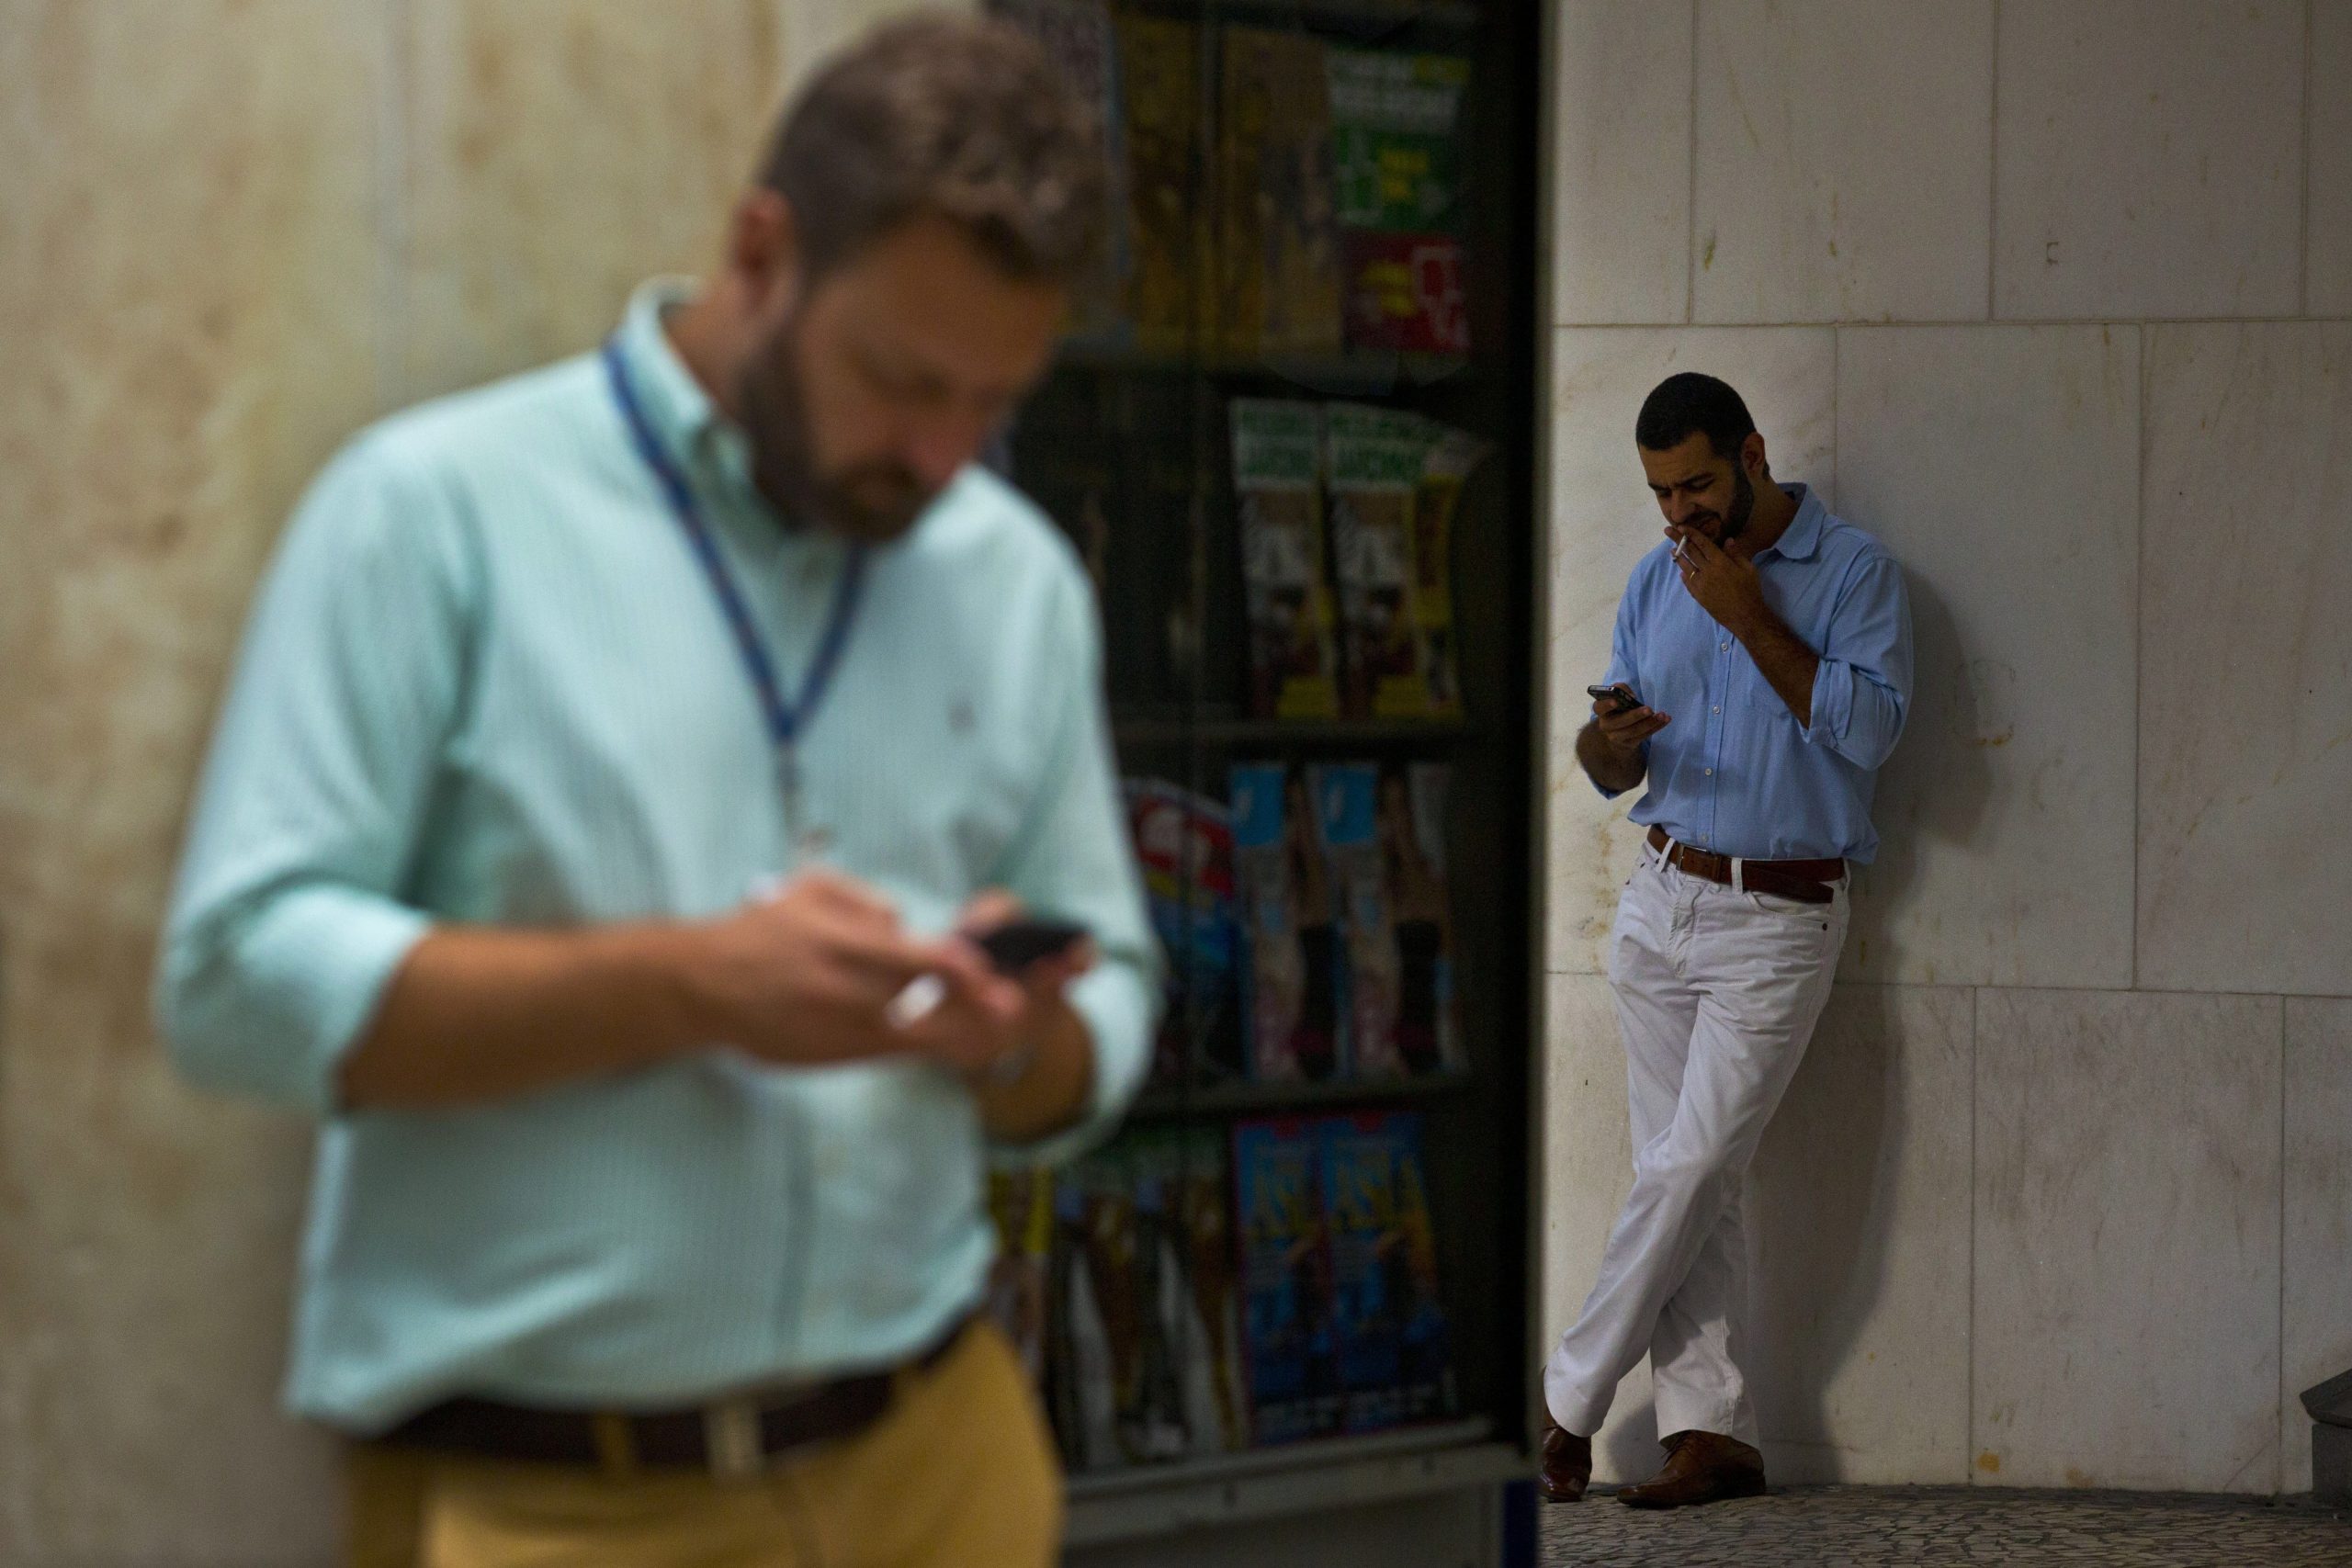 A man smoking and another man on his phone